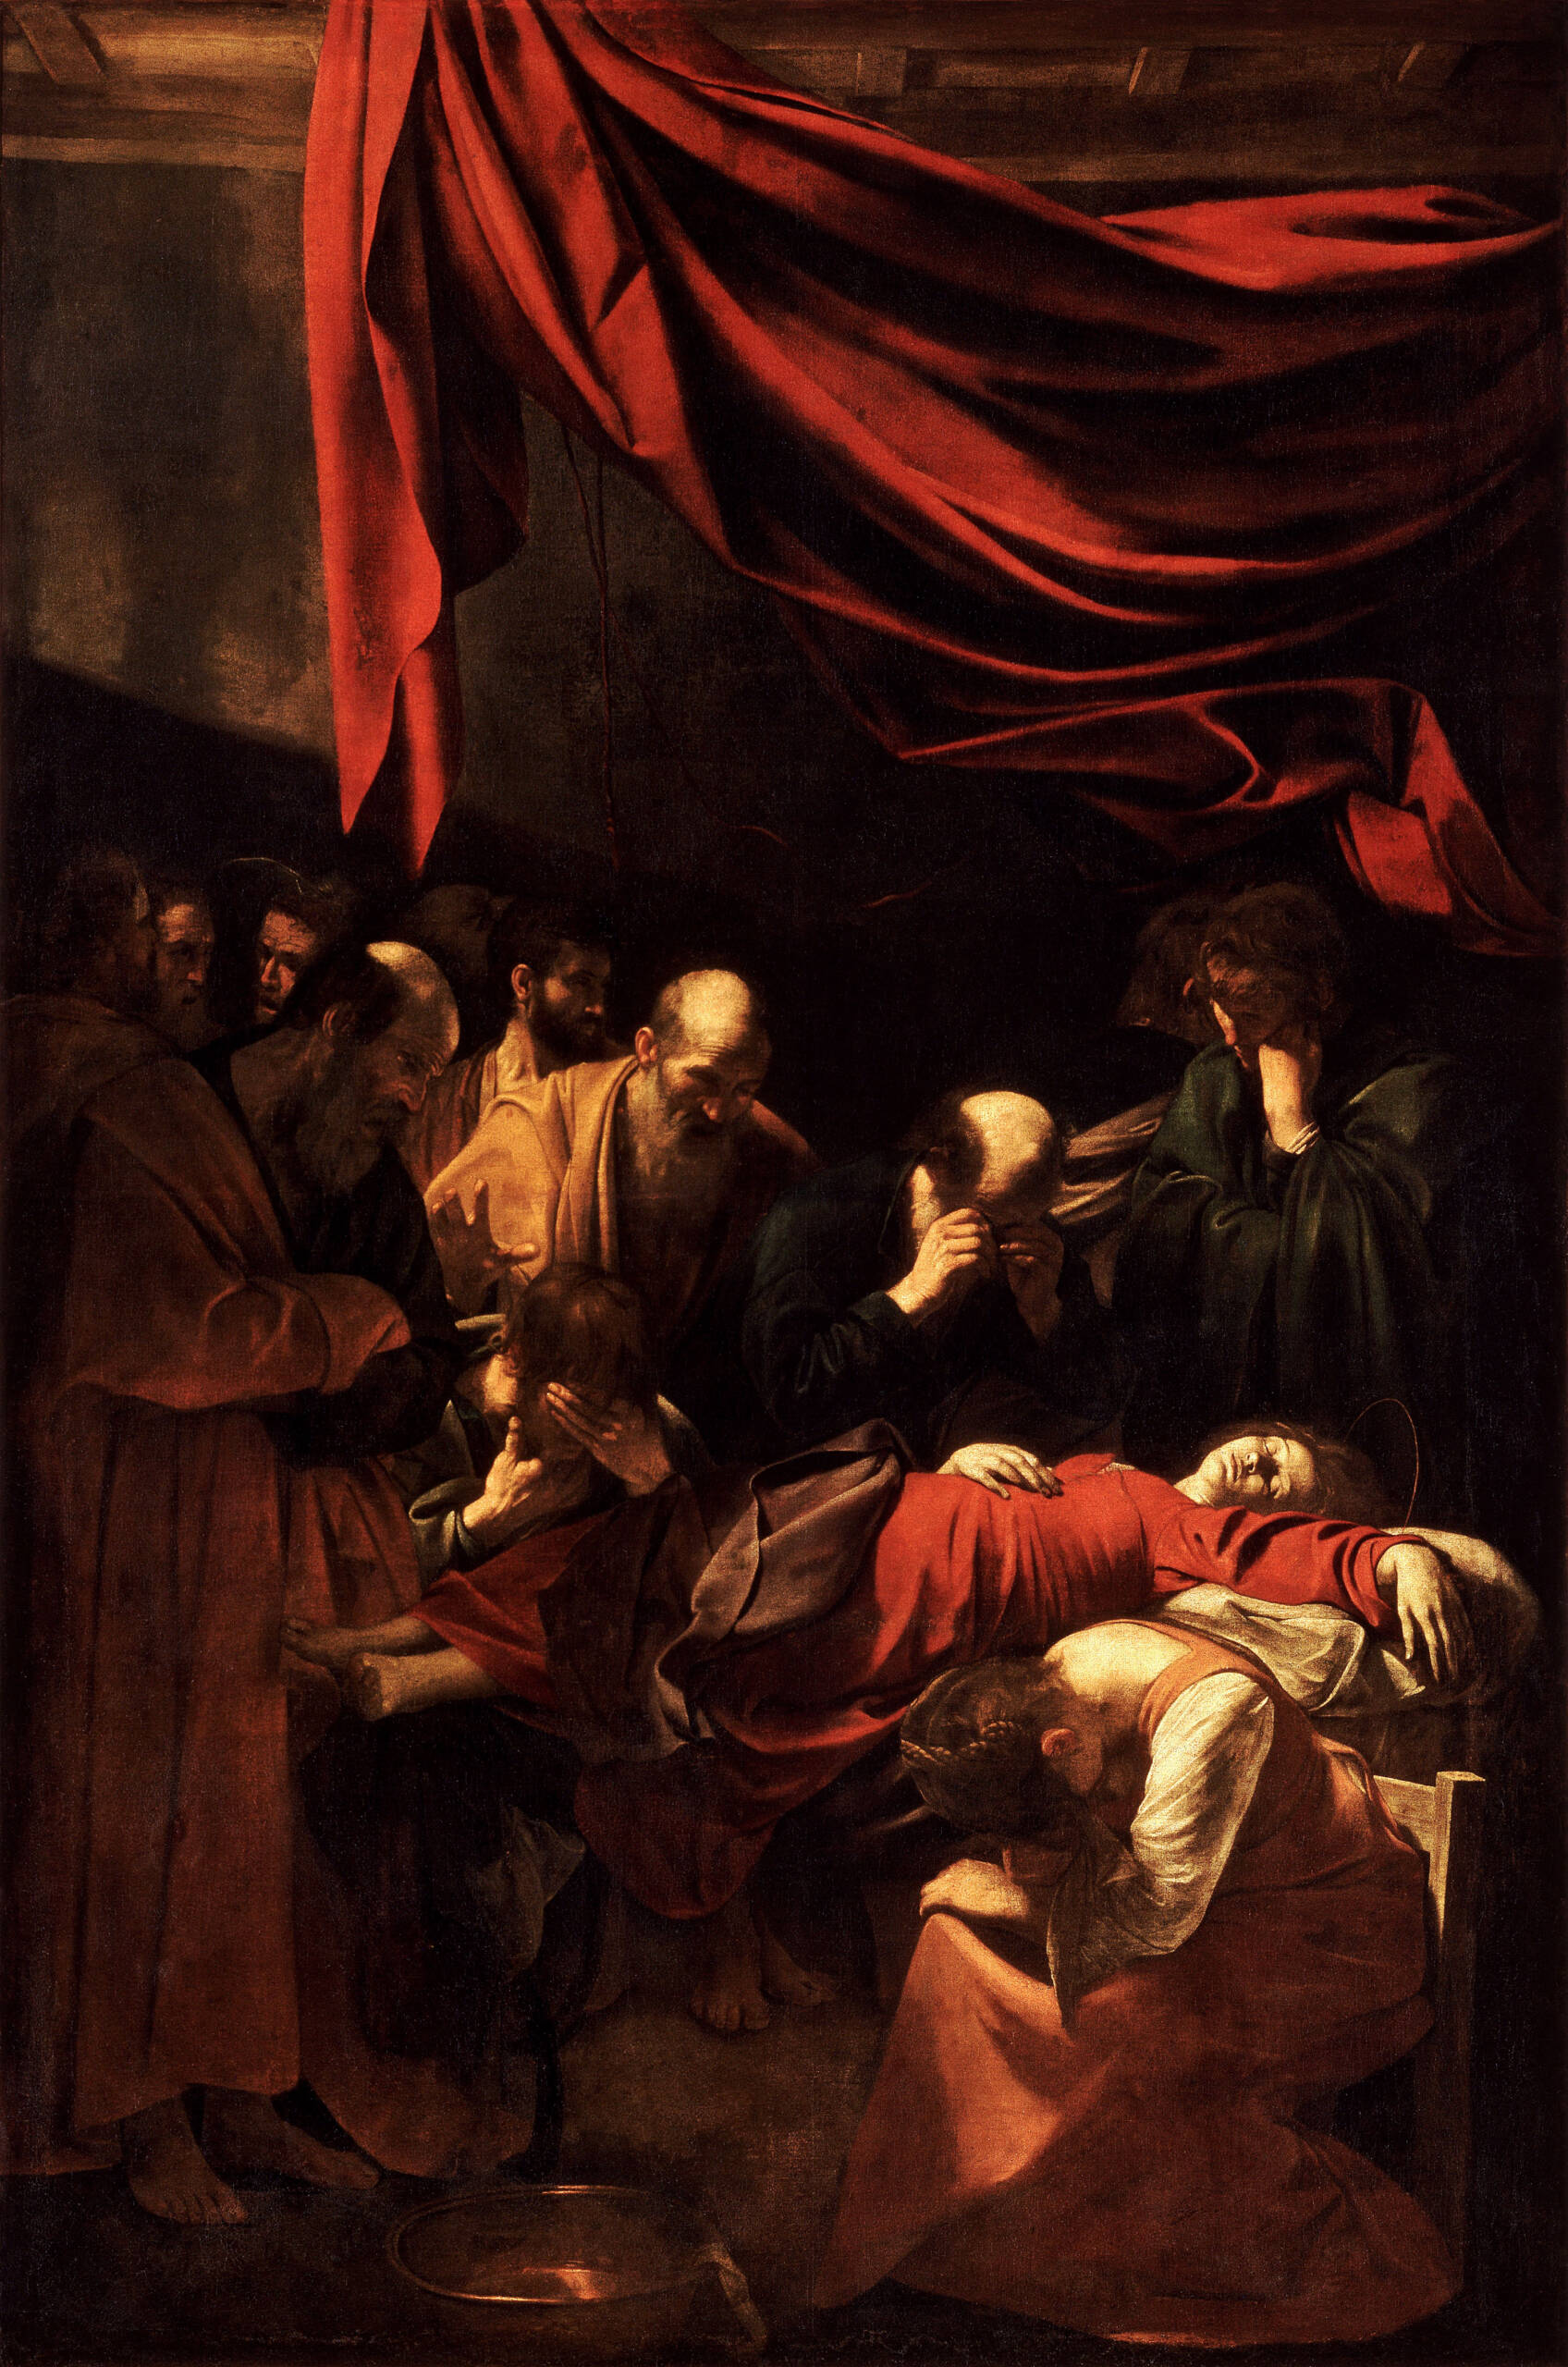 Caravaggio painting with red and heads and someone dying